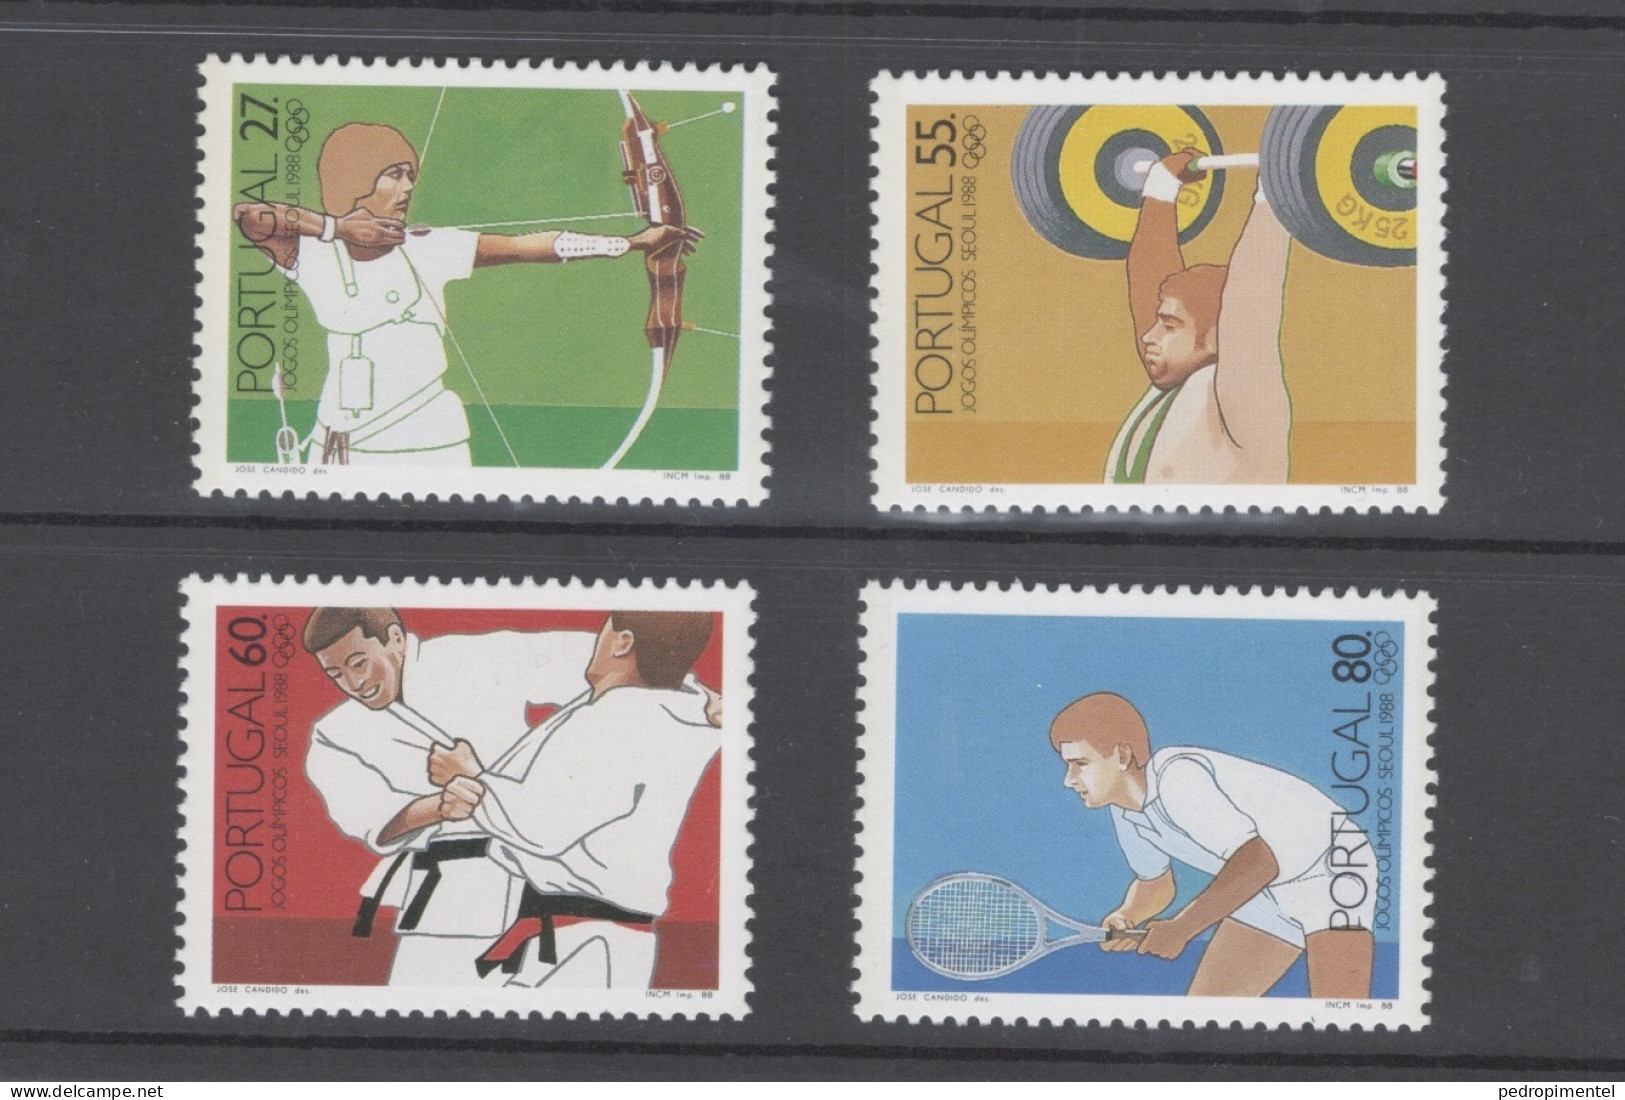 Portugal Madeira 1988 "Seoul Olympic Games" Condition MNH OG Mundifil #1854-1857 - Neufs